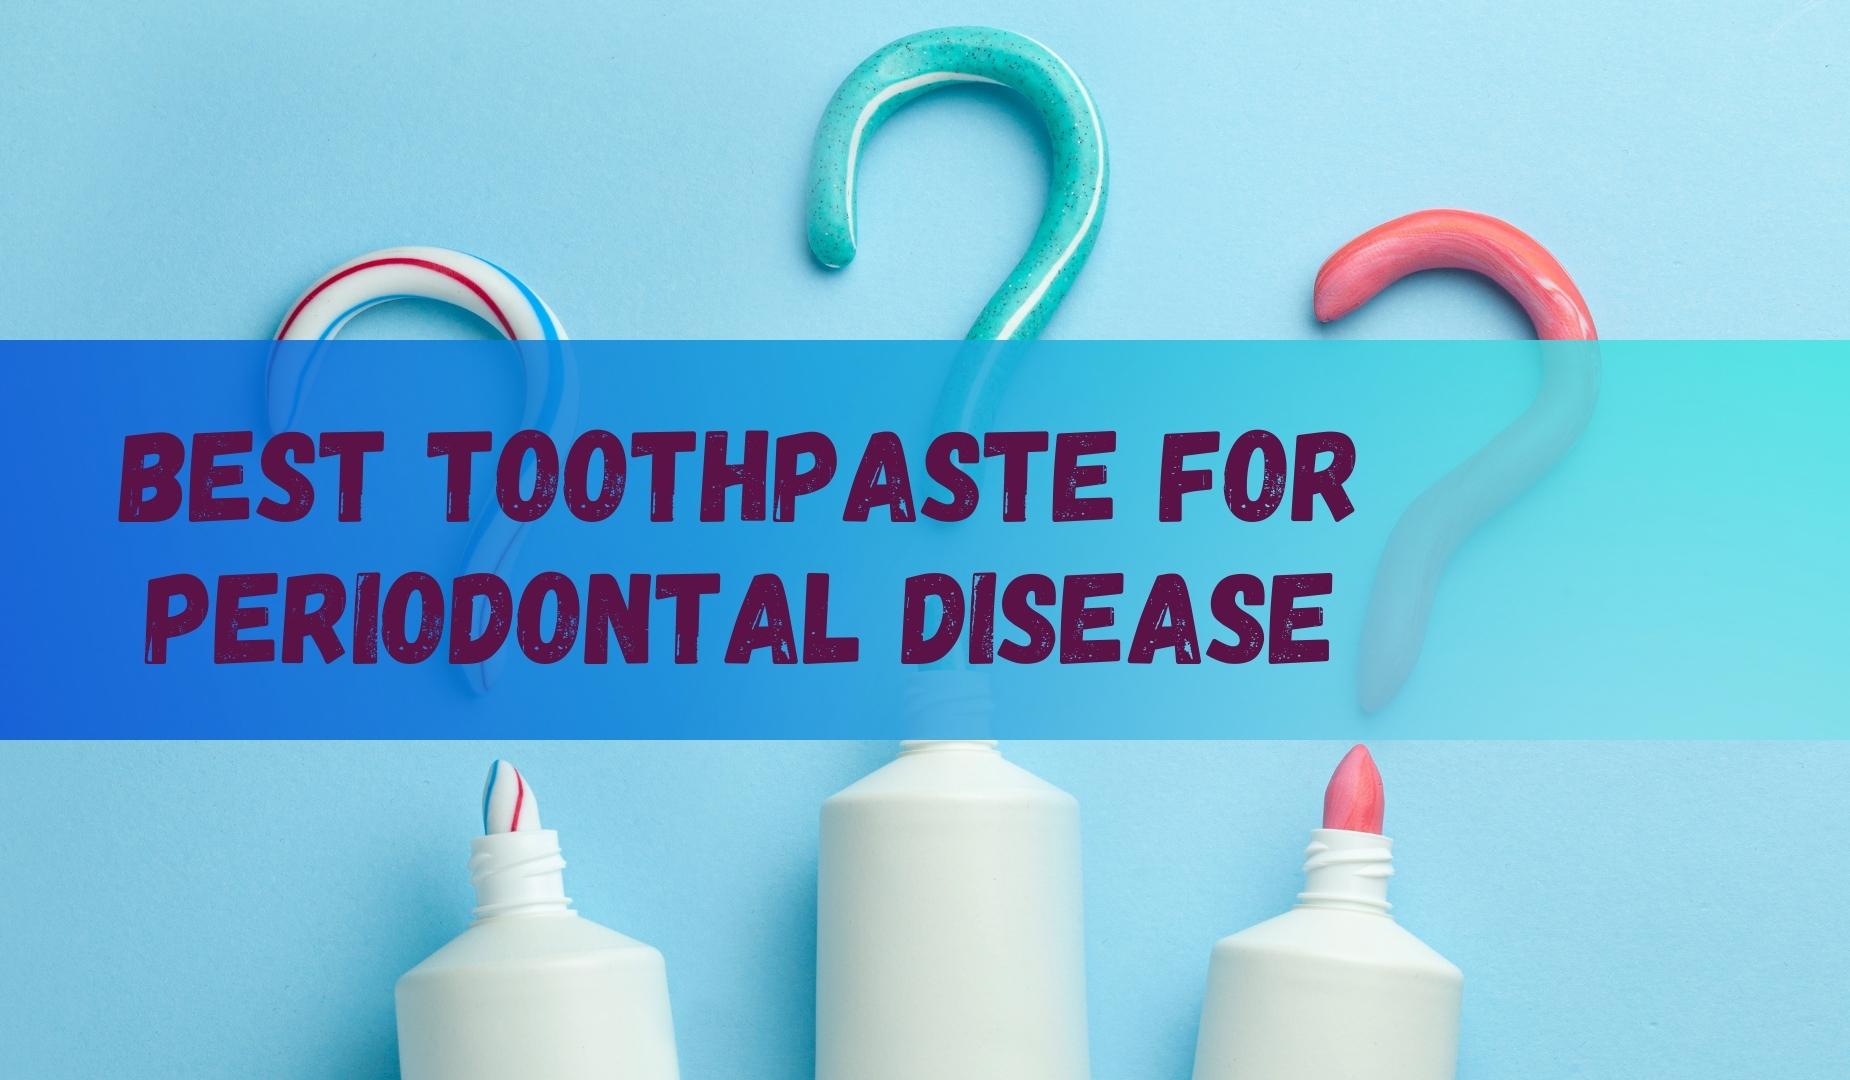 Best Toothpaste For Periodontal Disease